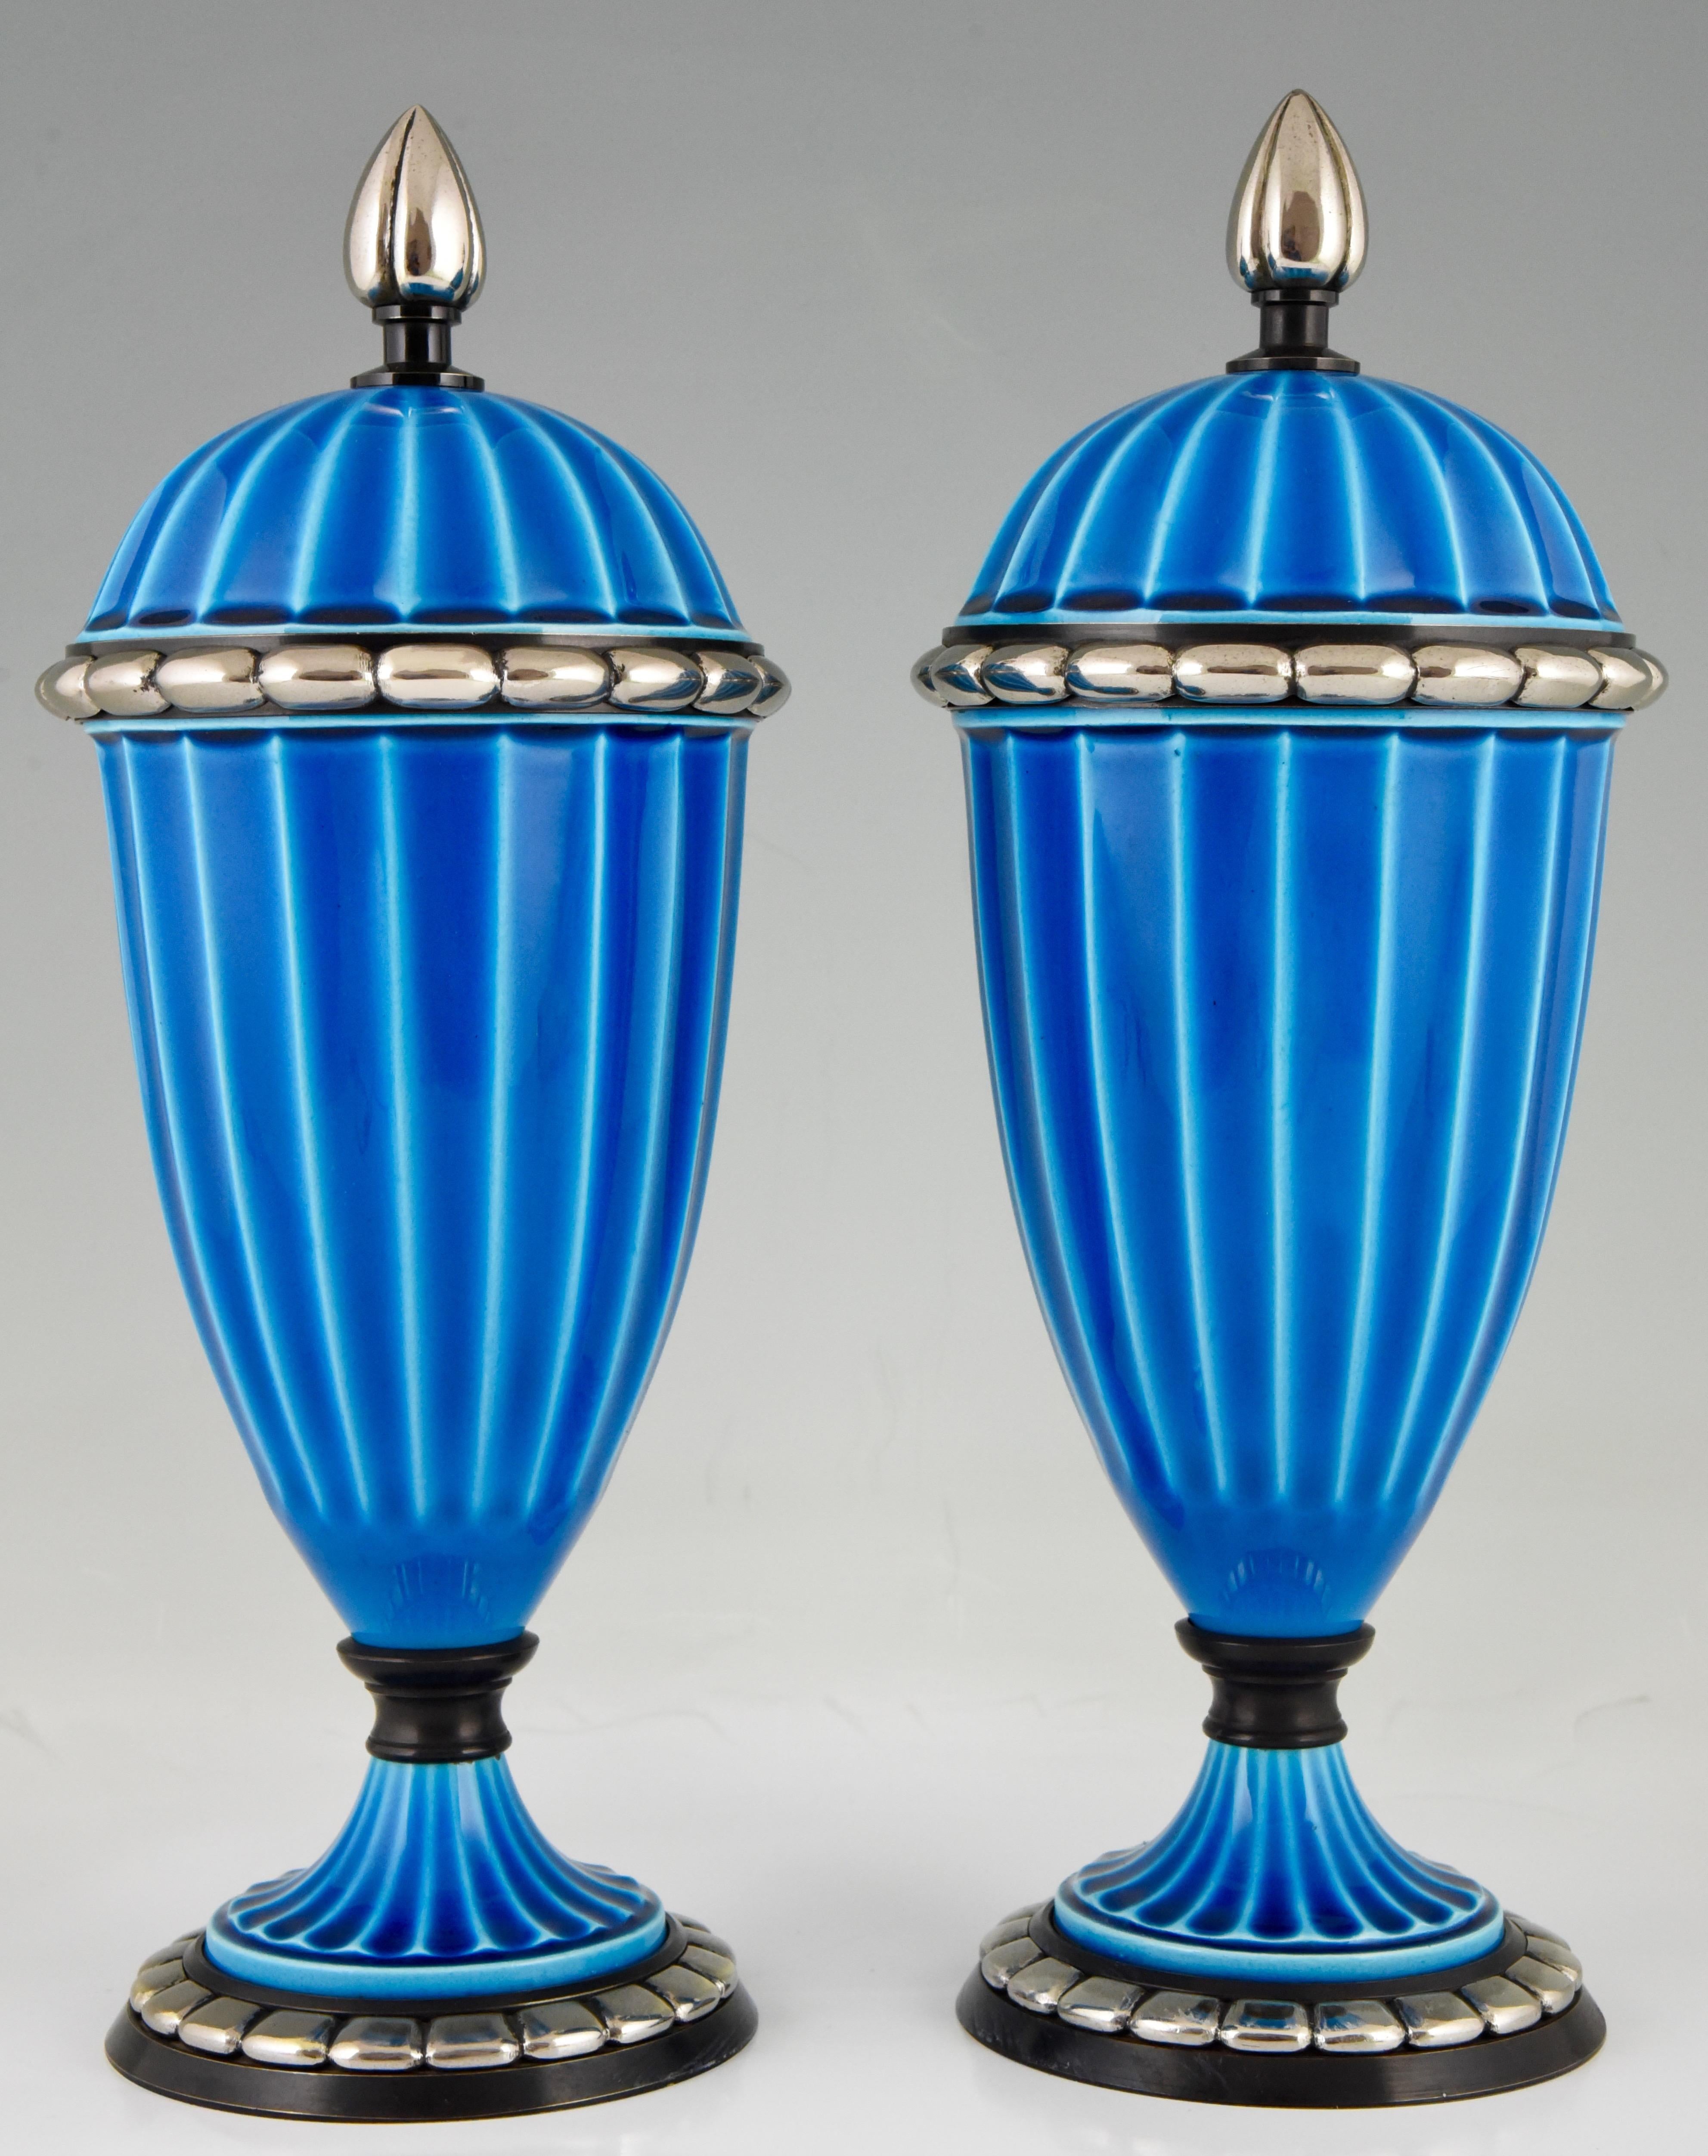 A pair of blue Art Deco ceramic vases or urns with blue glaze by Paul Milet for Sèvres. The vases have bronze decorations with silver patina, France, 1925.

“The Encyclopedia of Decorative Arts 1890-1940” By Philippe Garner. ?“Art Deco Keramik” by